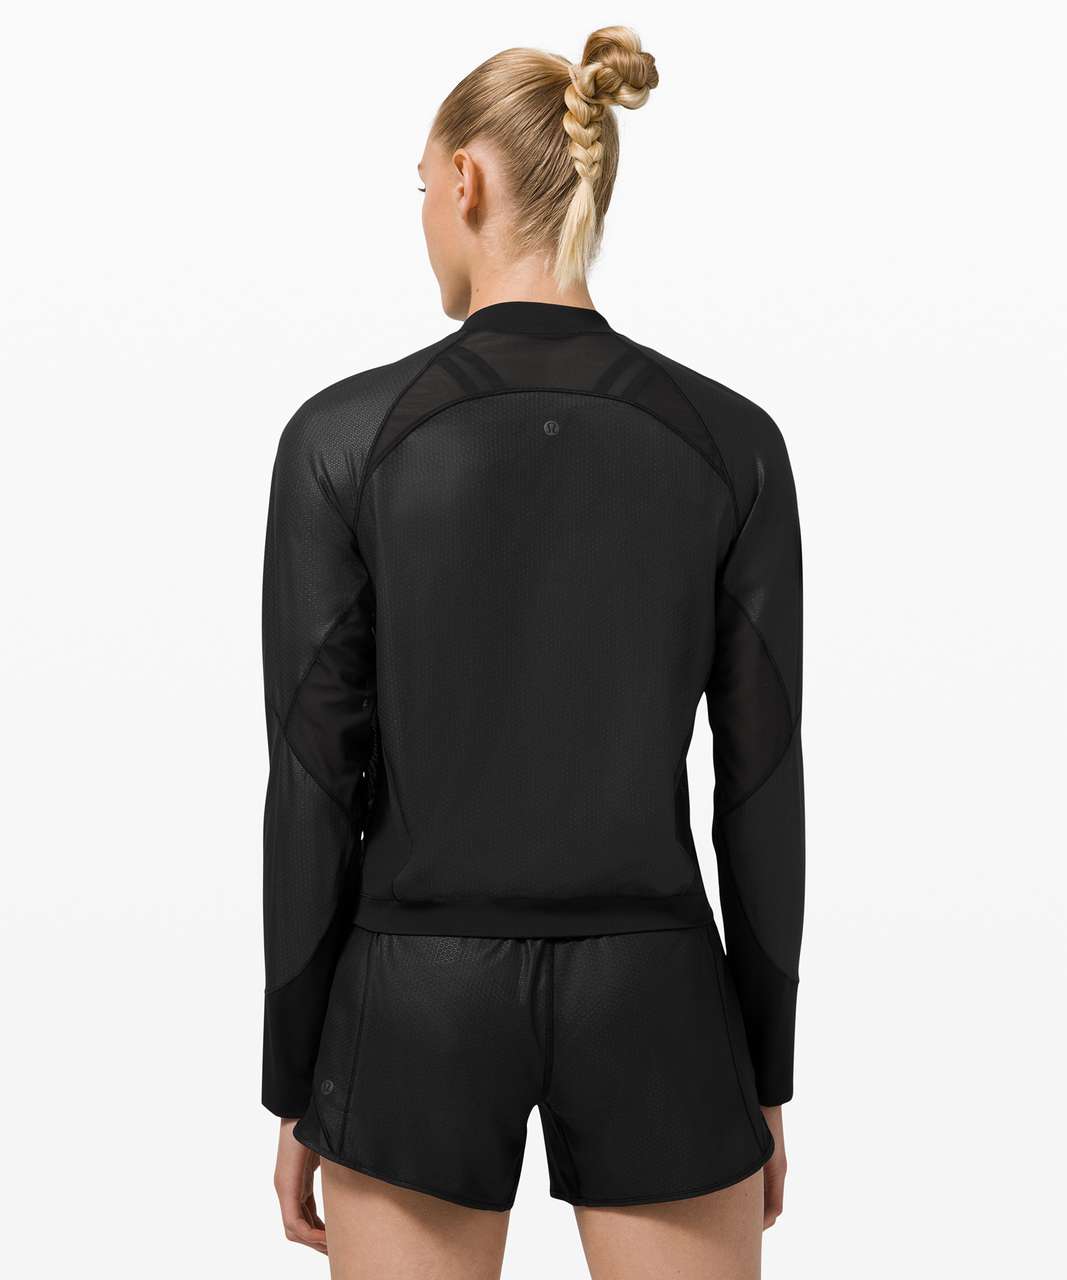 WMTM Lightweight run jacket in white and black emboss (both size 10), with  aligns 25” grey sage. Review in comments! : r/lululemon